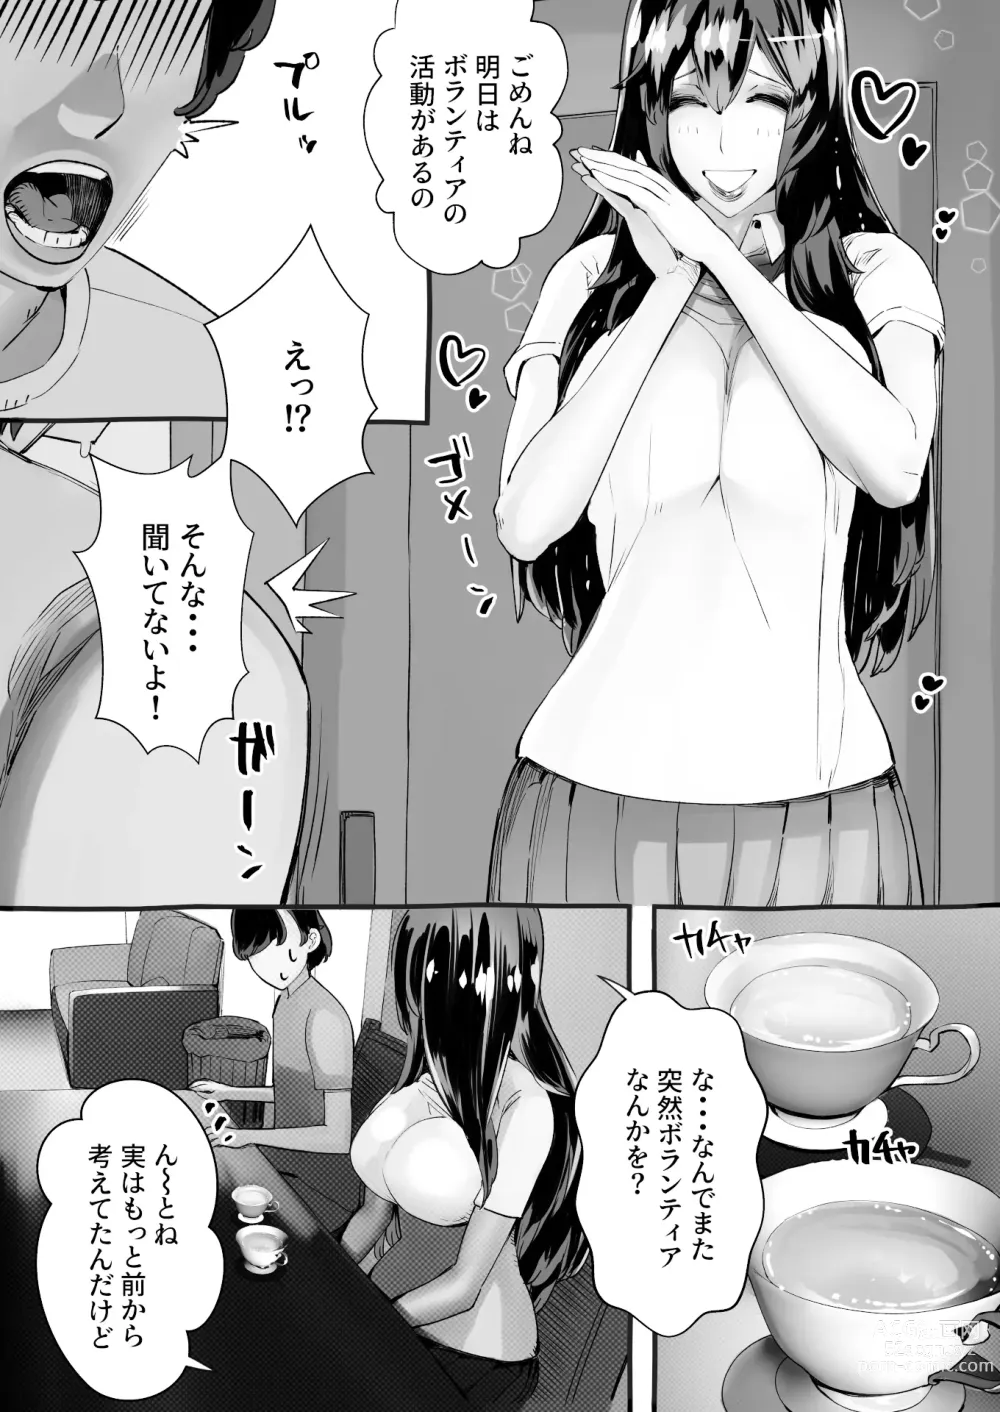 Page 12 of doujinshi 僕の彼女が他人棒で絶頂いたす